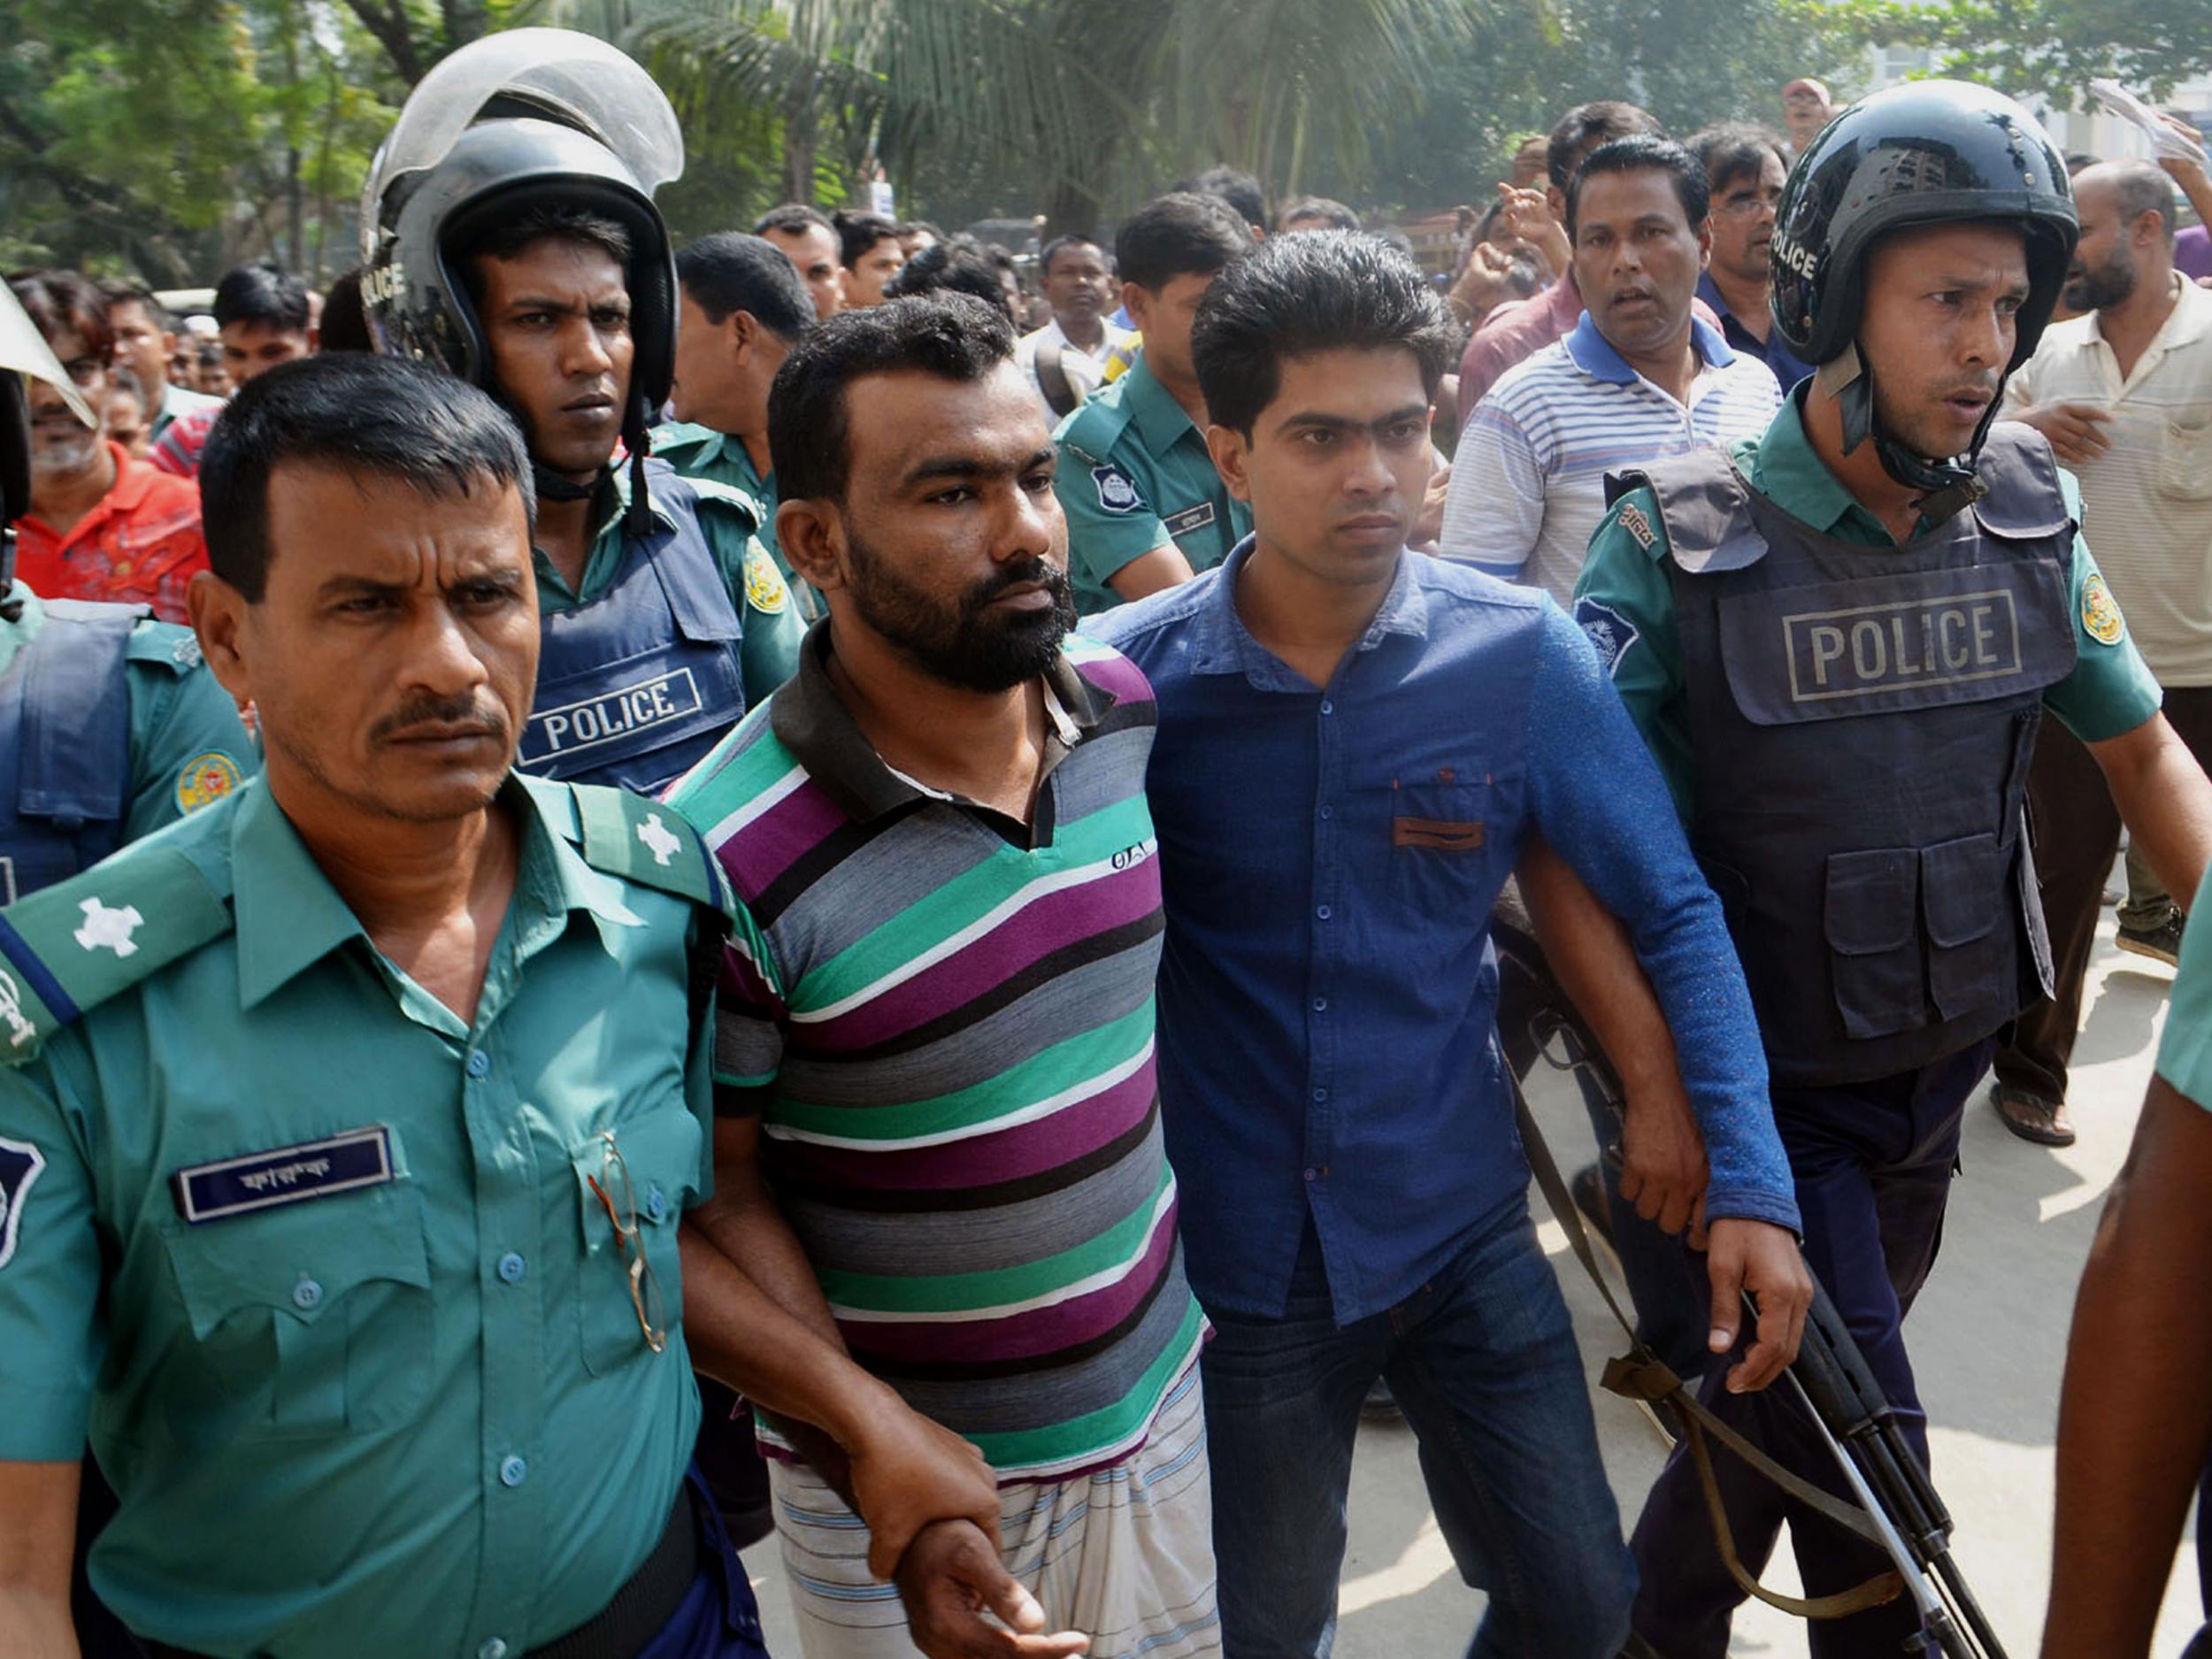 Bangladesh police escort a suspect (C) in a high-profile murder case involving the brutal killing of a child at a court in Khulna